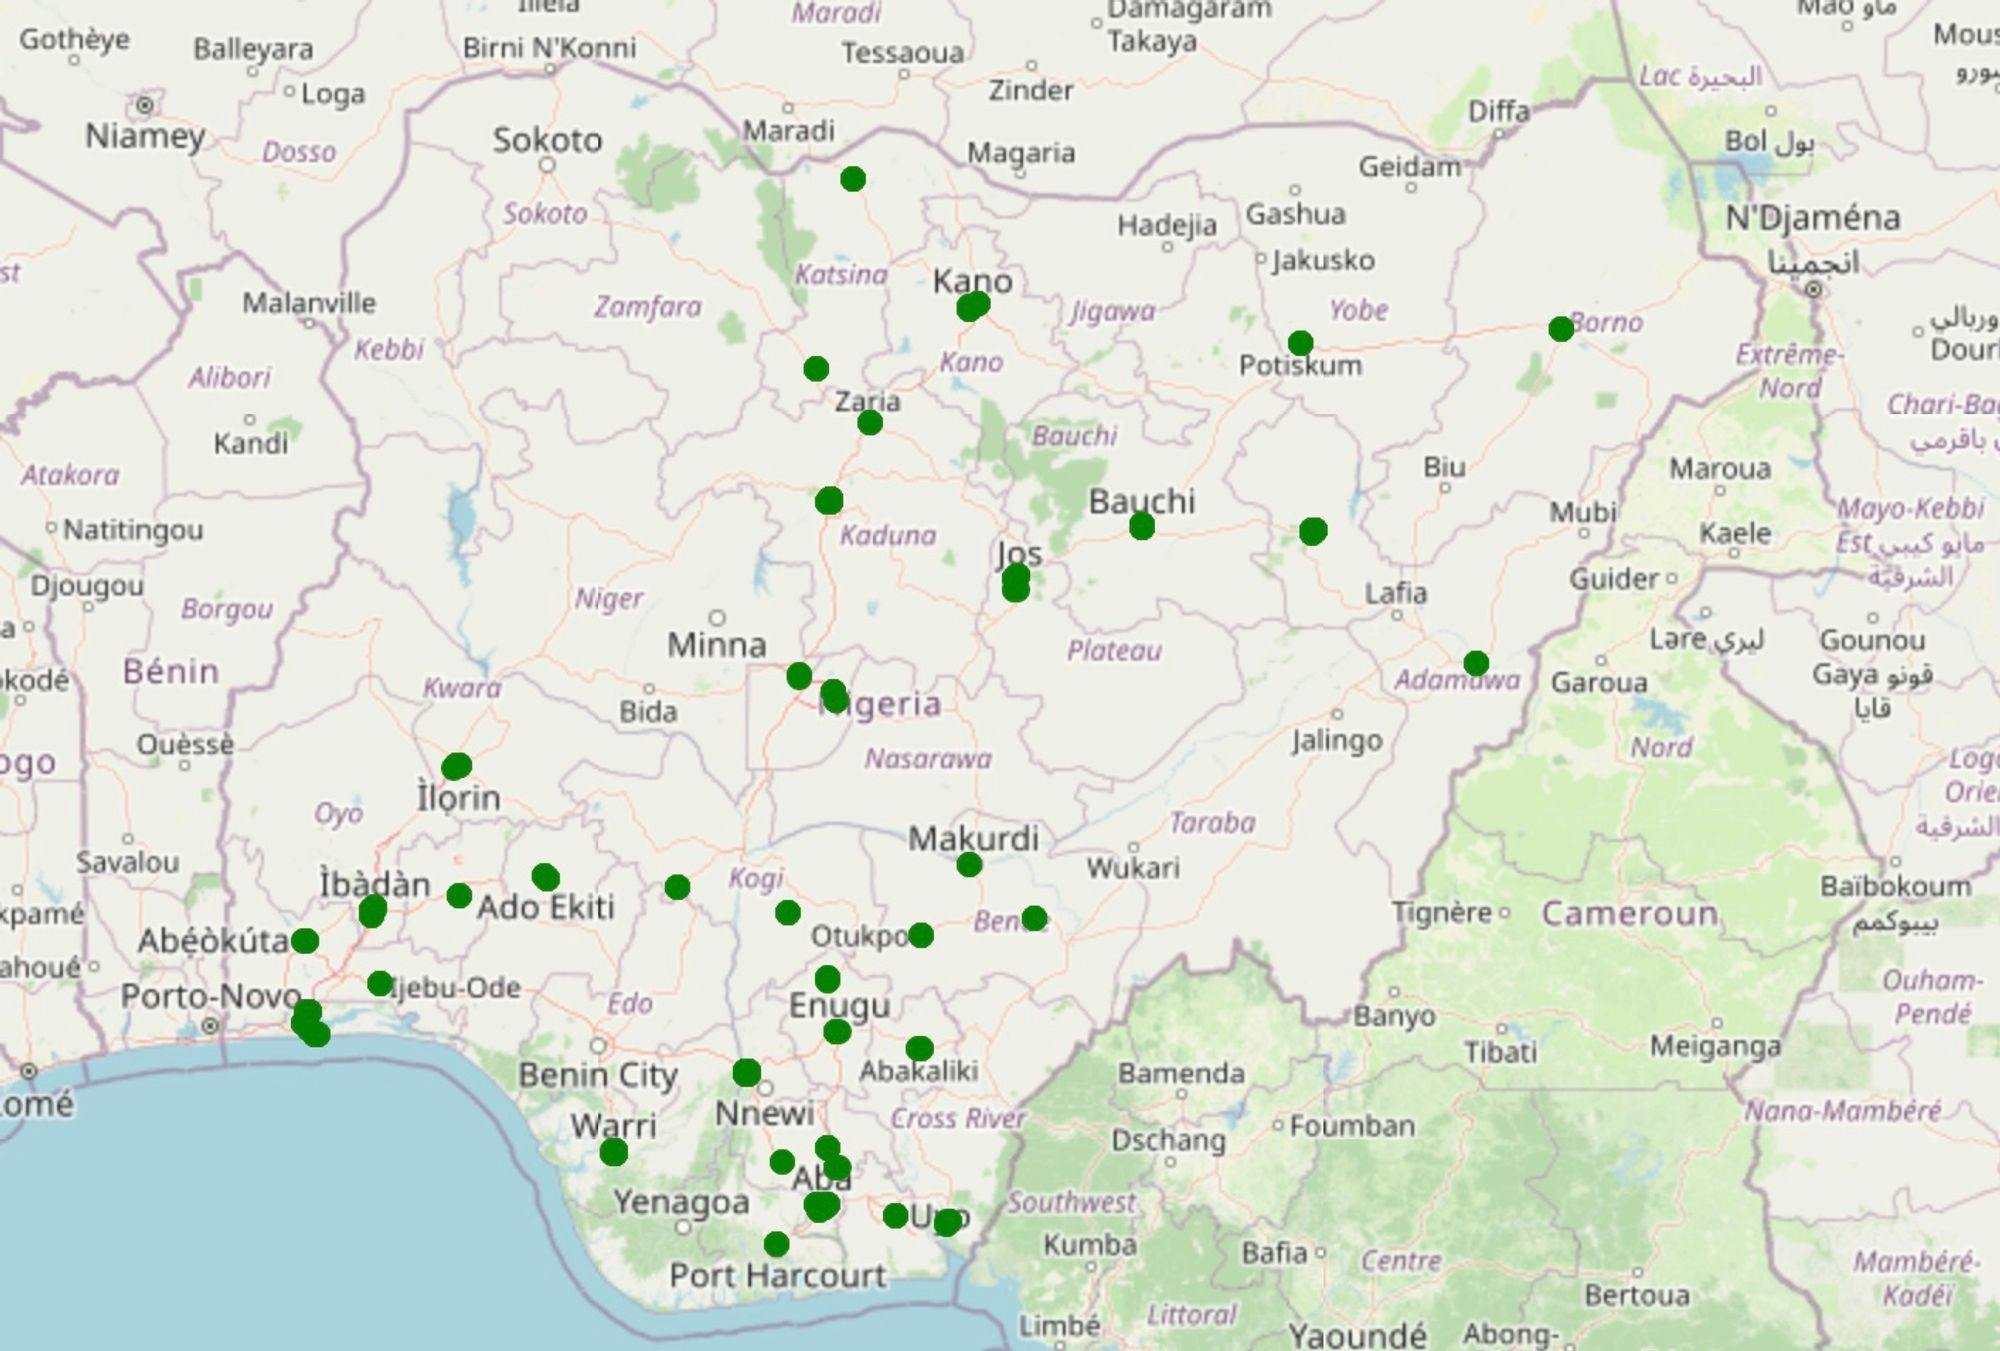 Figure 1: Across Nigeria, 74 markets were selected by Nigeria’s Rural Electrification Agency (REA) for a baseline energy audit survey to inform future energy system investments. nLine sensors were placed in these markets to remotely monitor power quality and reliability. Note: the locations of some markets overlap with each other at this zoom level.